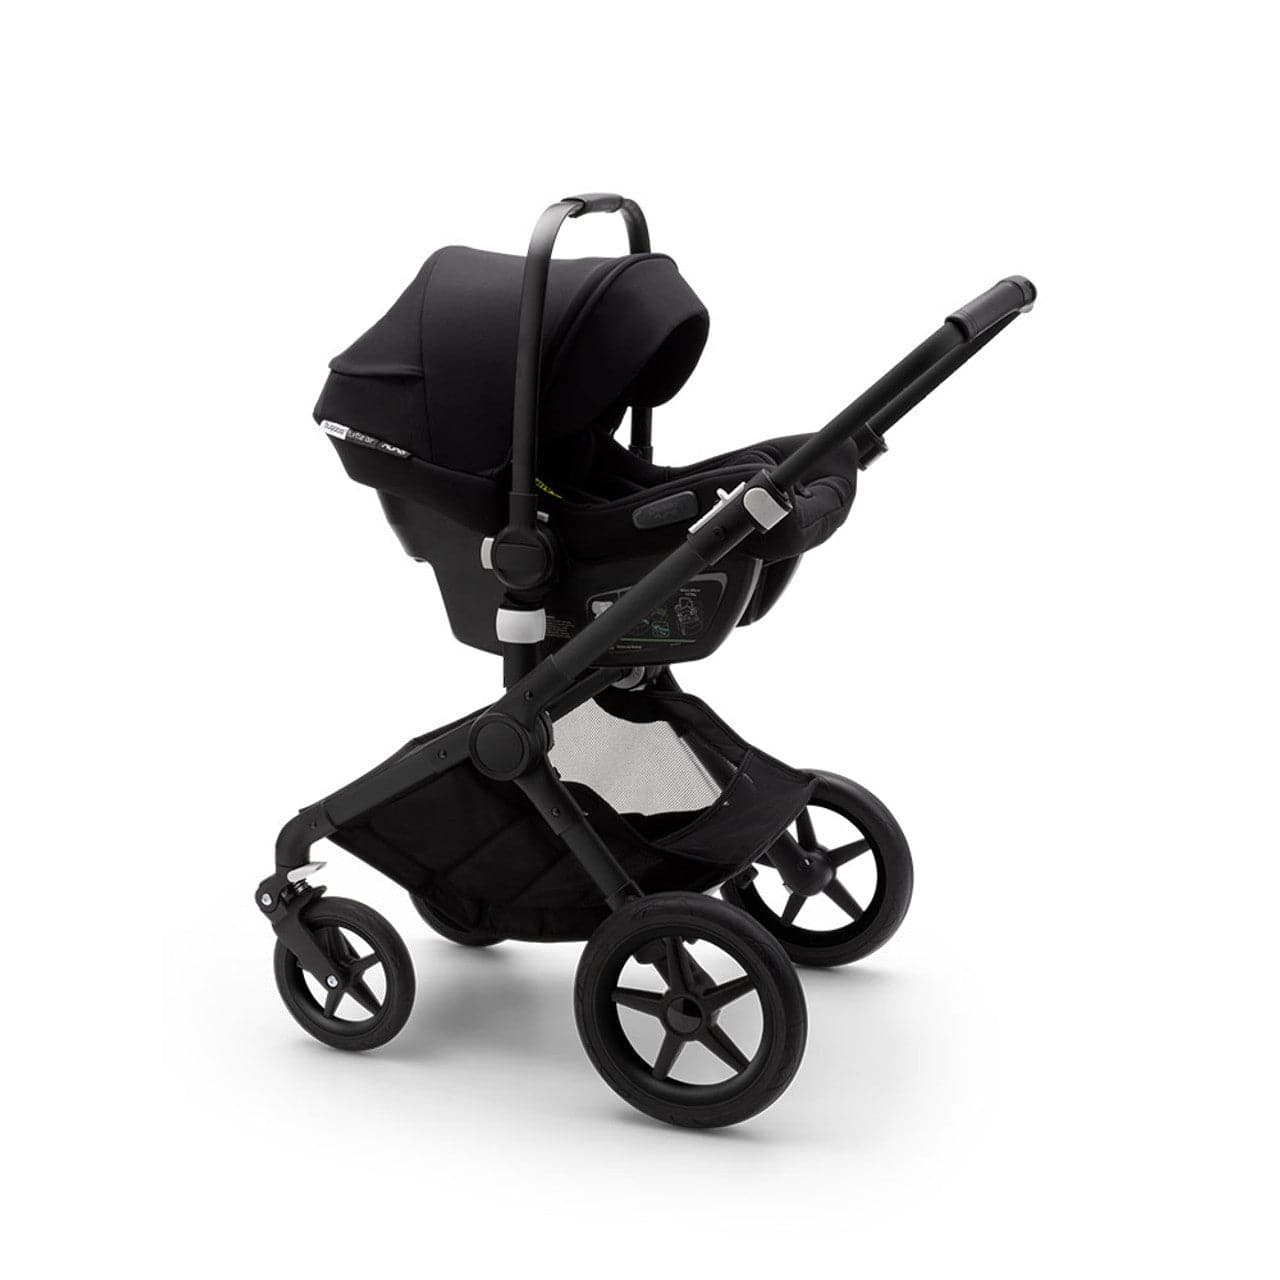 Bugaboo Turtle Air Newborn Car Seat by Nuna - Black - For Your Little One